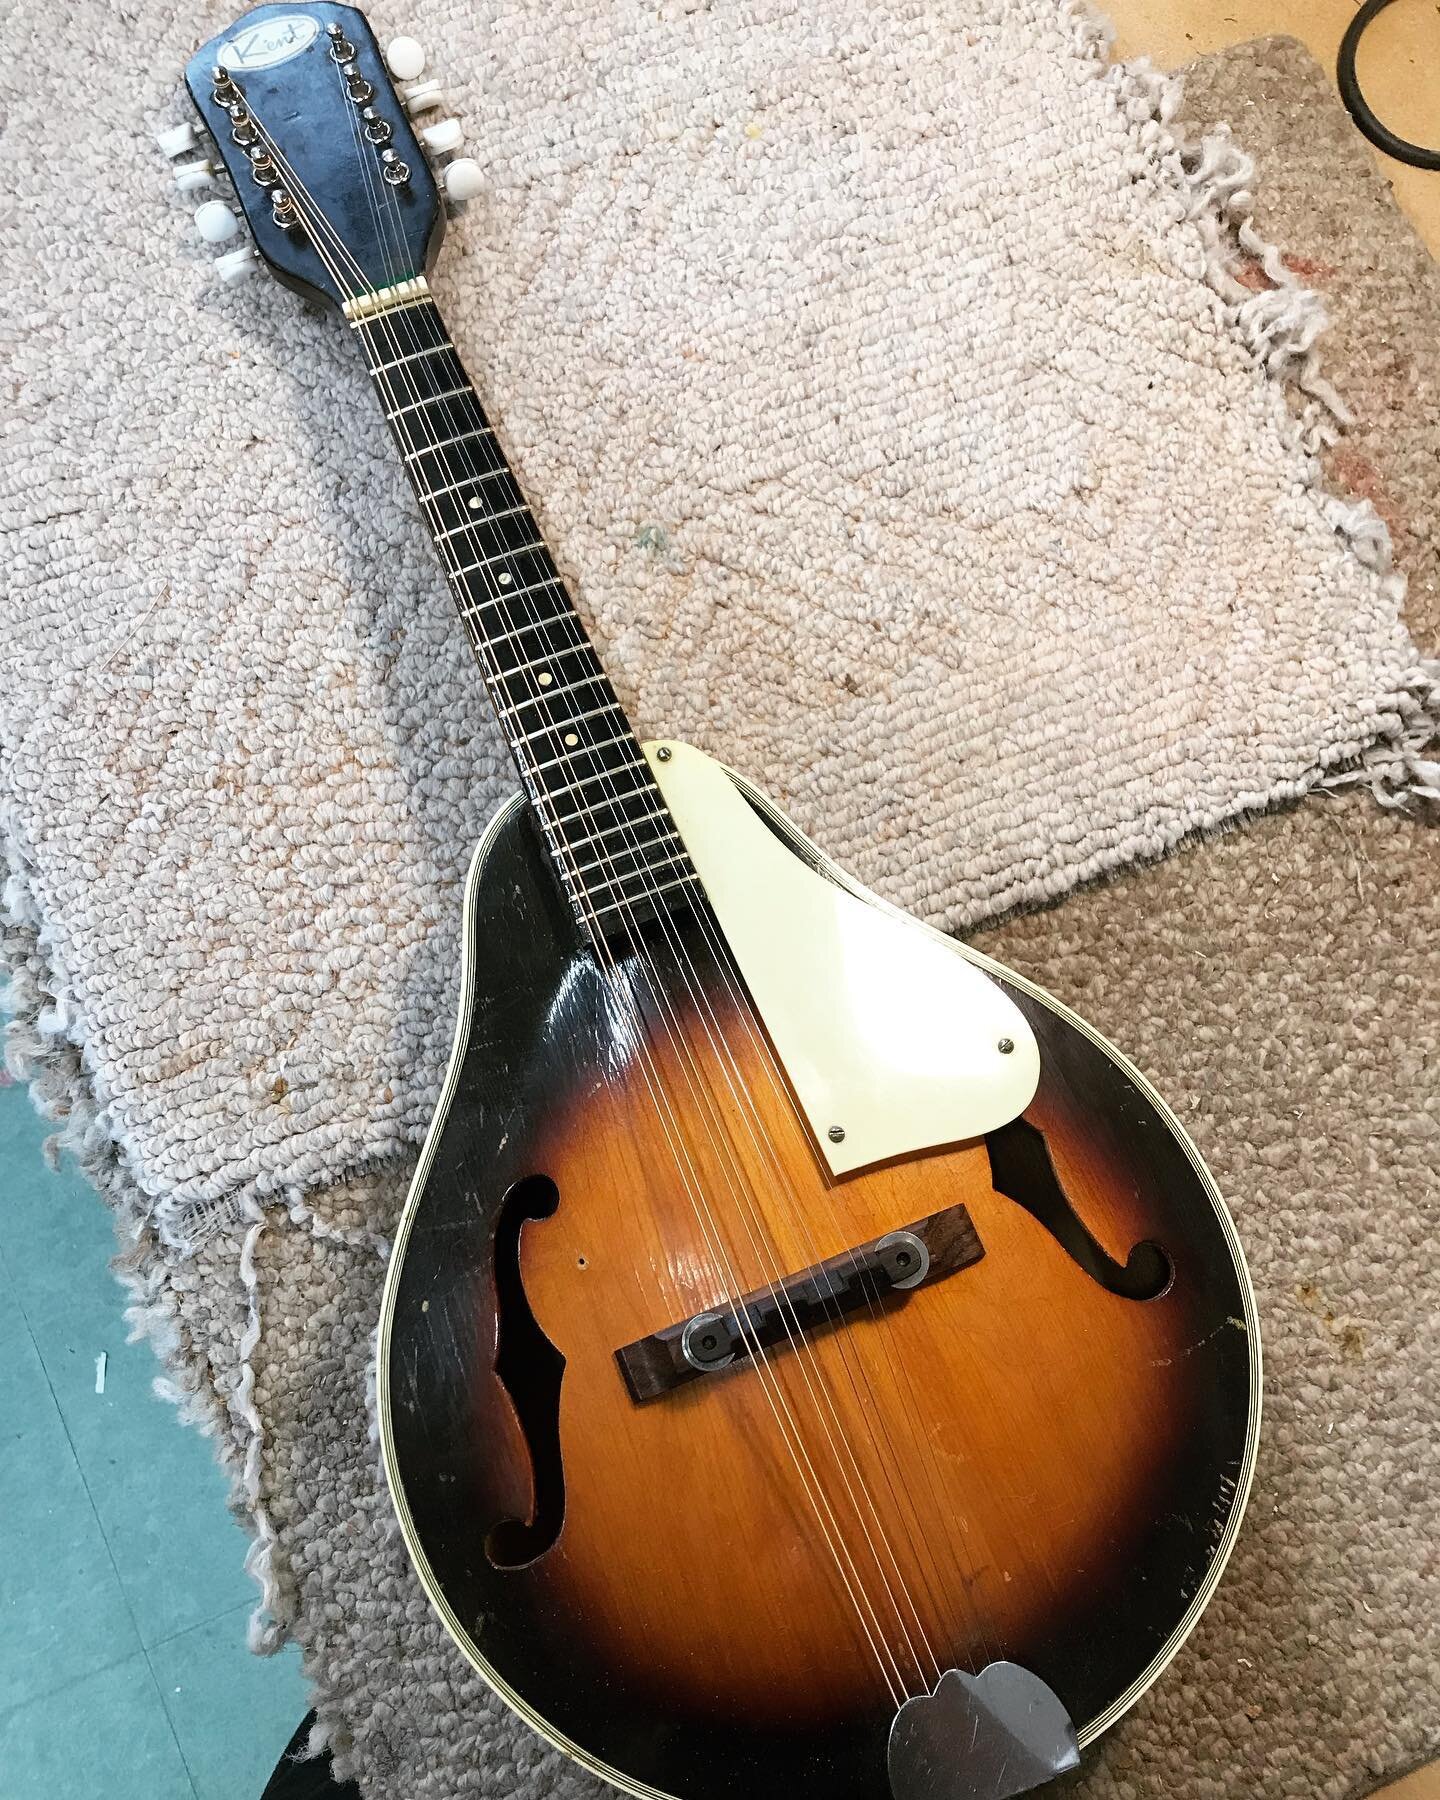 Check out this sweet little Kent mandolin!

It came in in a cardboard box and the neck had come off. The dovetail of the neck had almost disintegrated and needed rebuilding. The dovetail pocket on this mandolin didn&rsquo;t exactly have even or consi